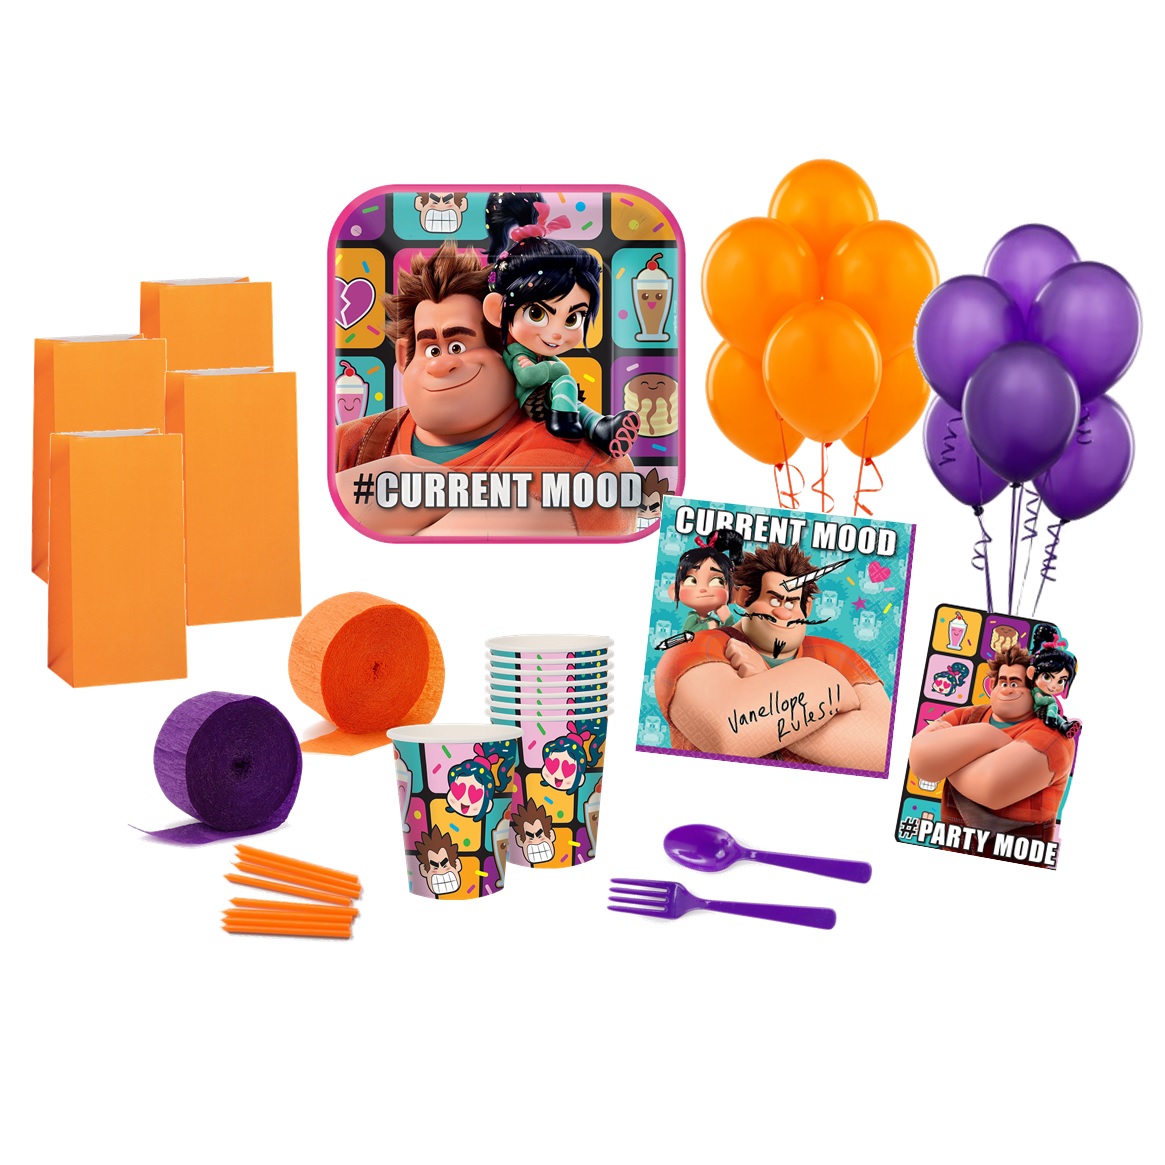 Wreck-It Ralph Deluxe Party Pack